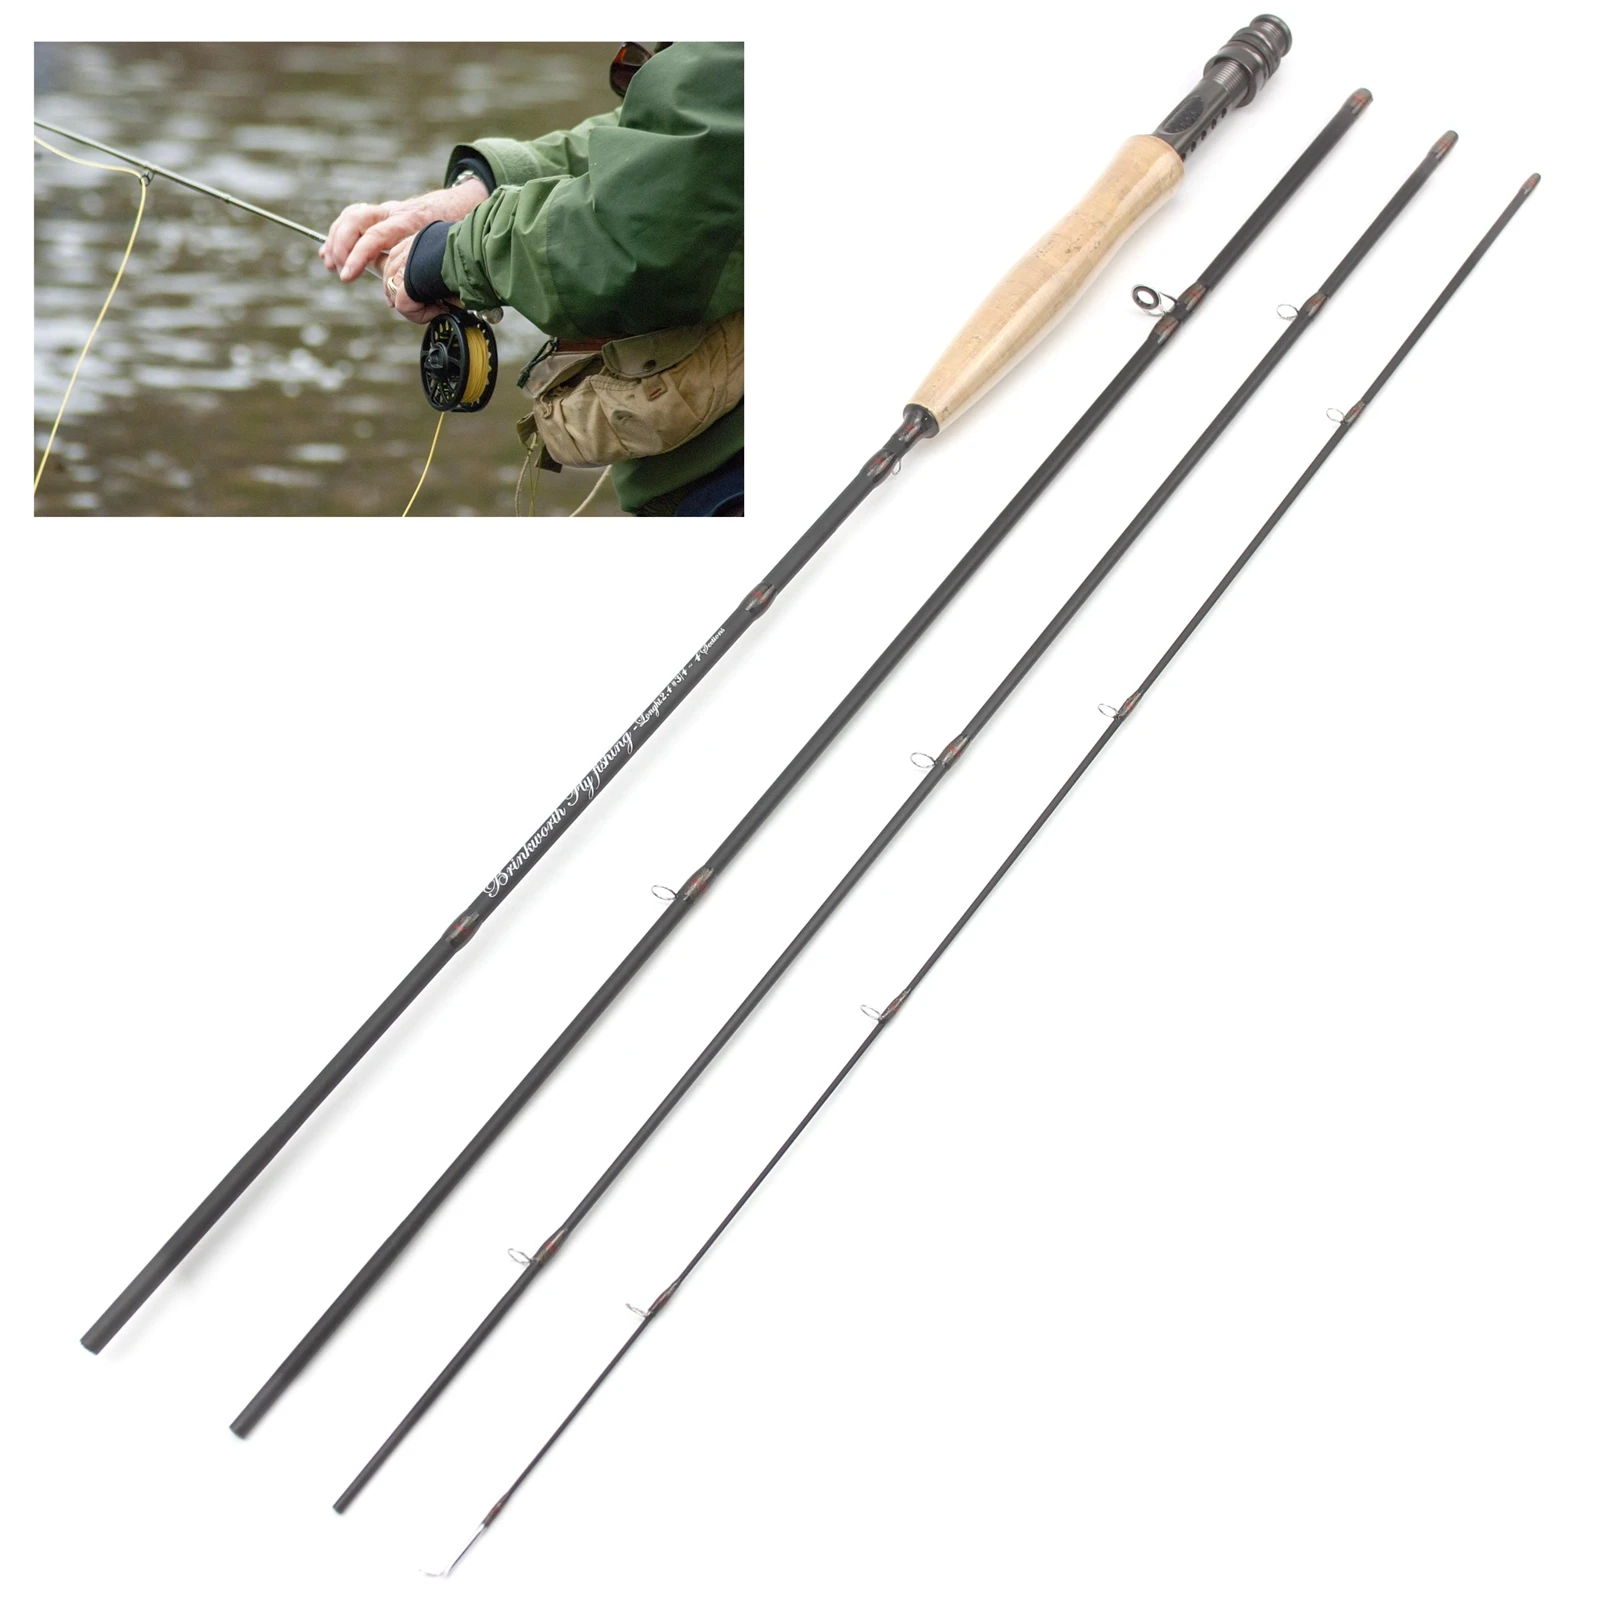 

NEW 2.4M 2.7M Fly Fishing Rod Carbon Fiber Cork Handle 4 Section Lightweight Pikes Fish Trout Pole Lake River Stream Fly Rod